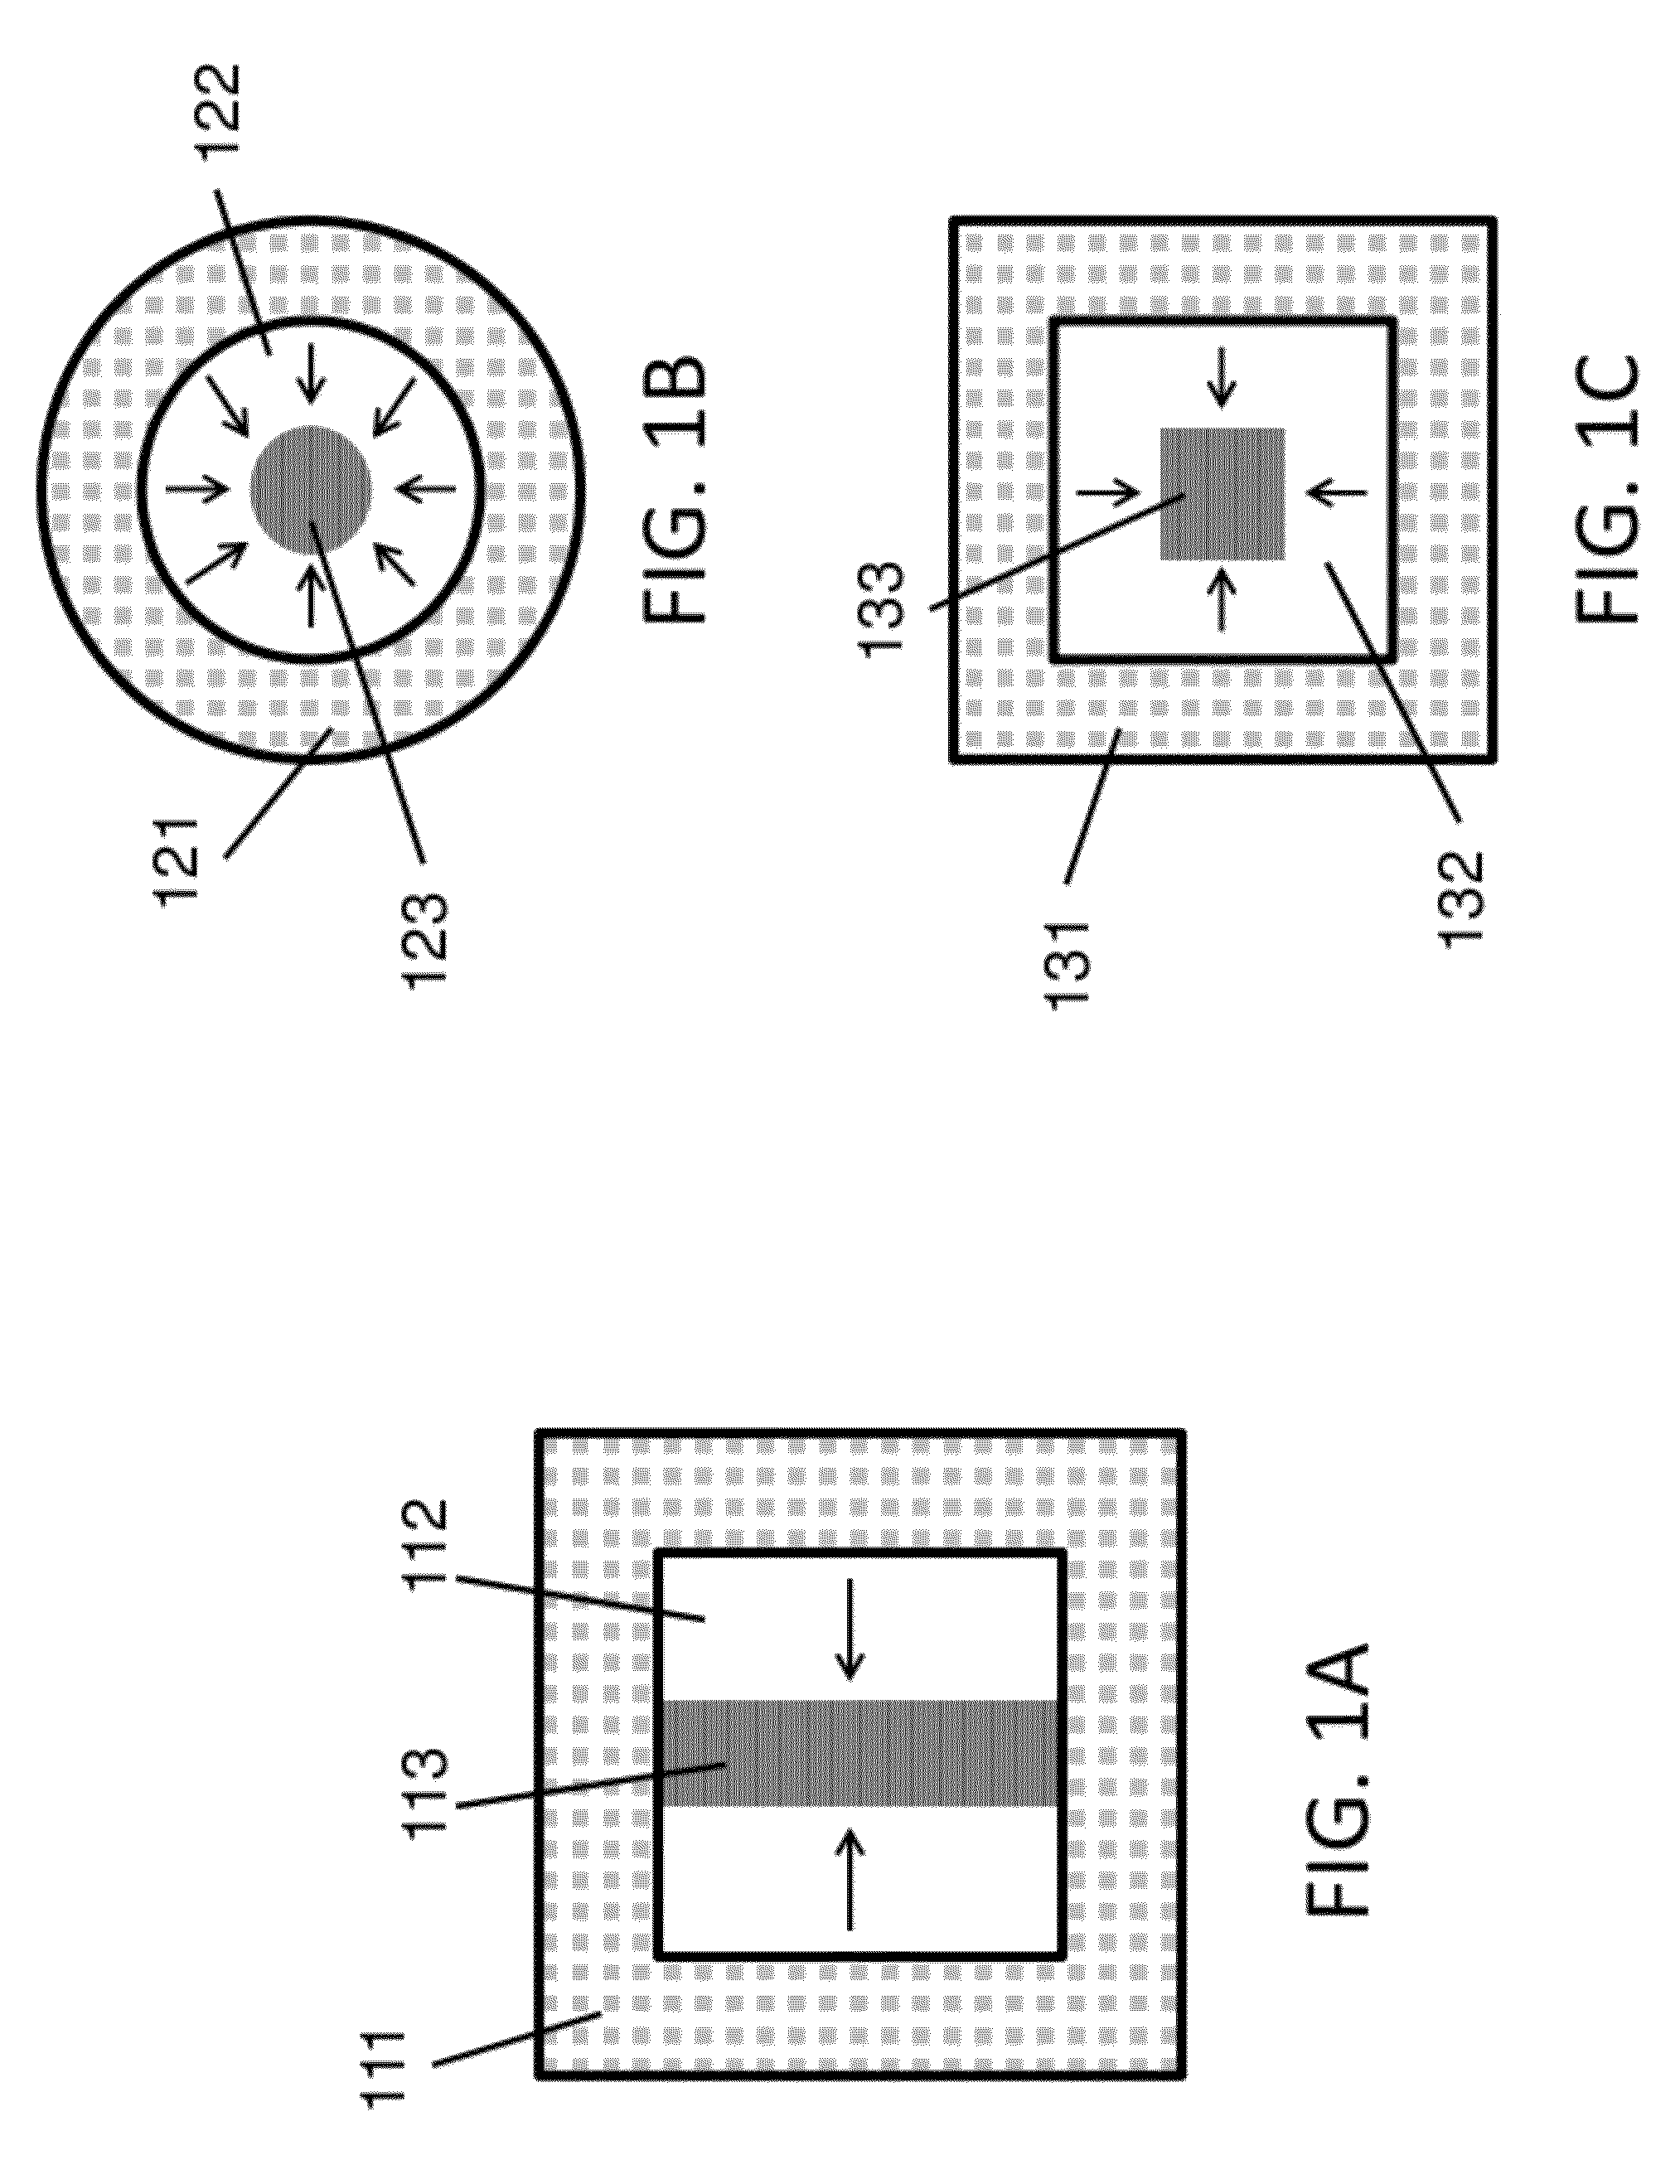 Method of Changing Fluid Flow by Using an Optical Beam